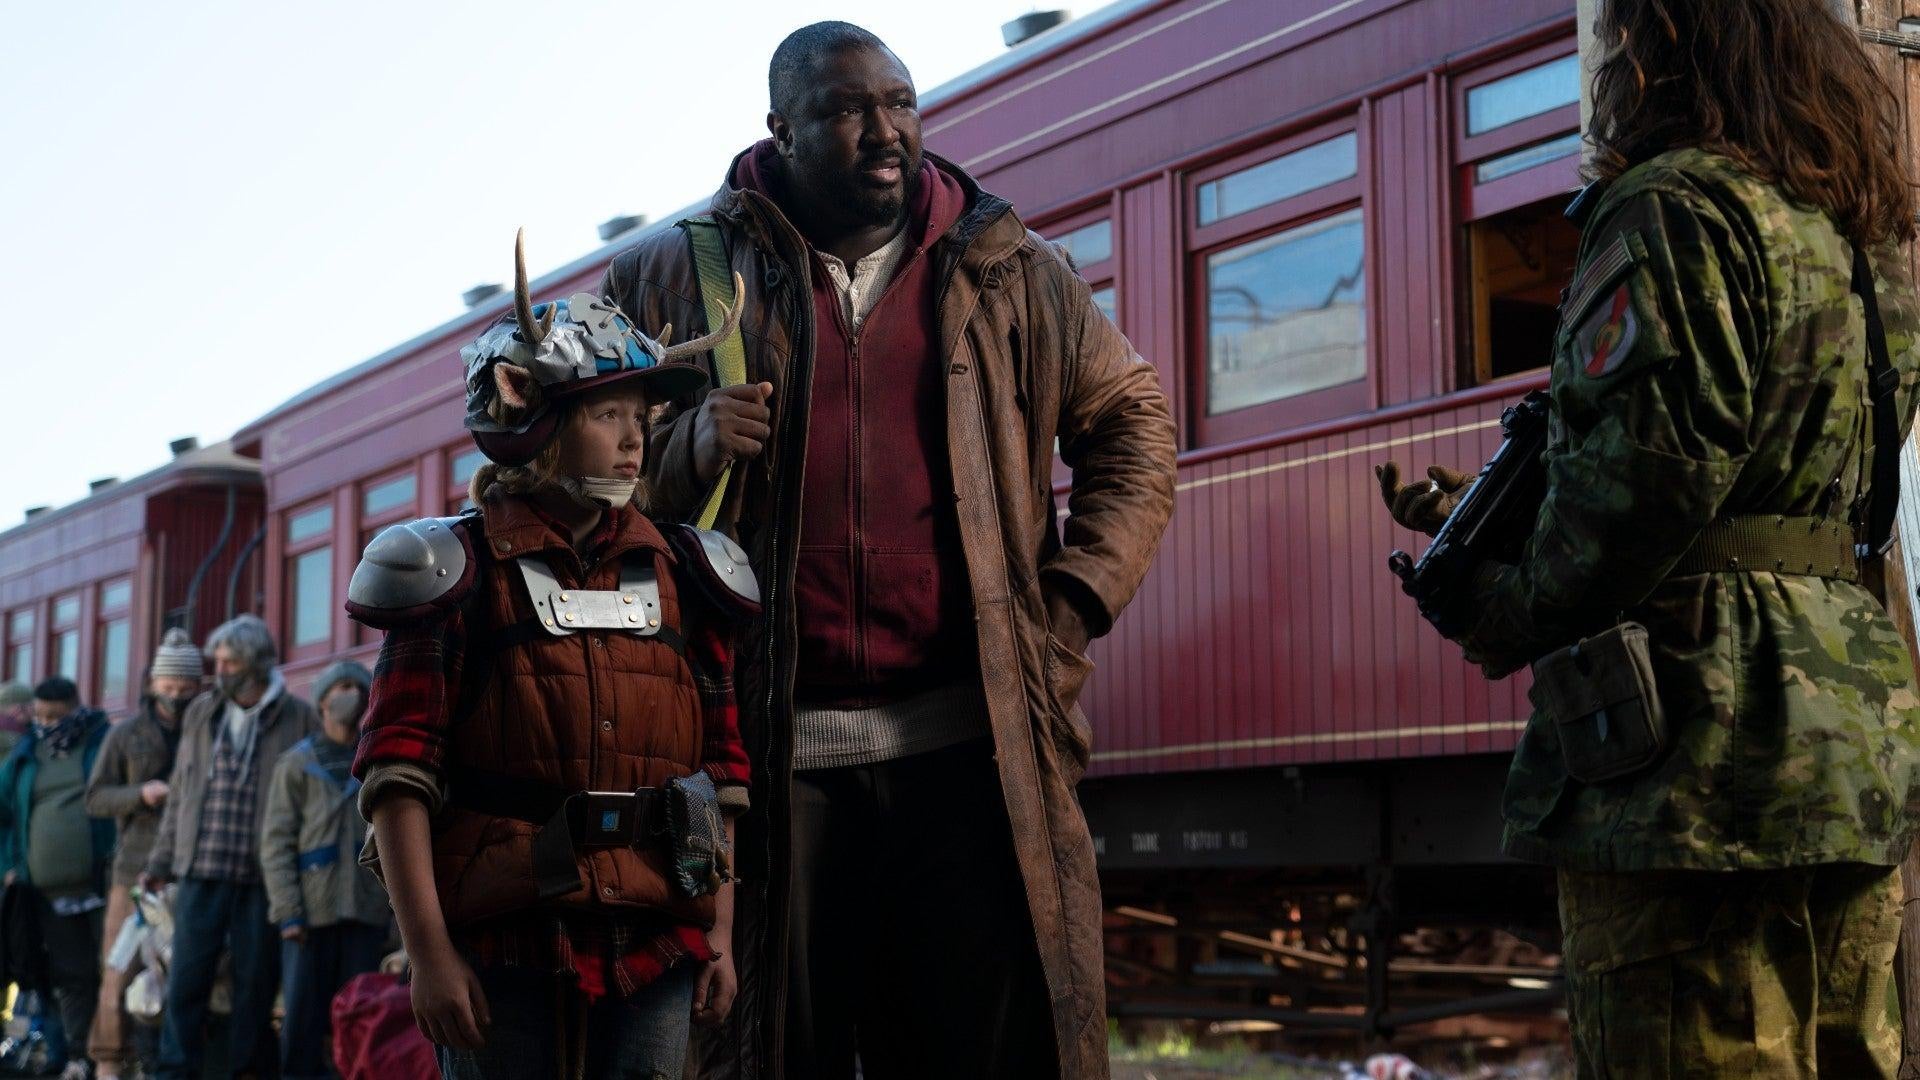 Gus (Christian Convery) and Tommy (Nonso Anozie) in Sweet Tooth. (Photo: Netflix)